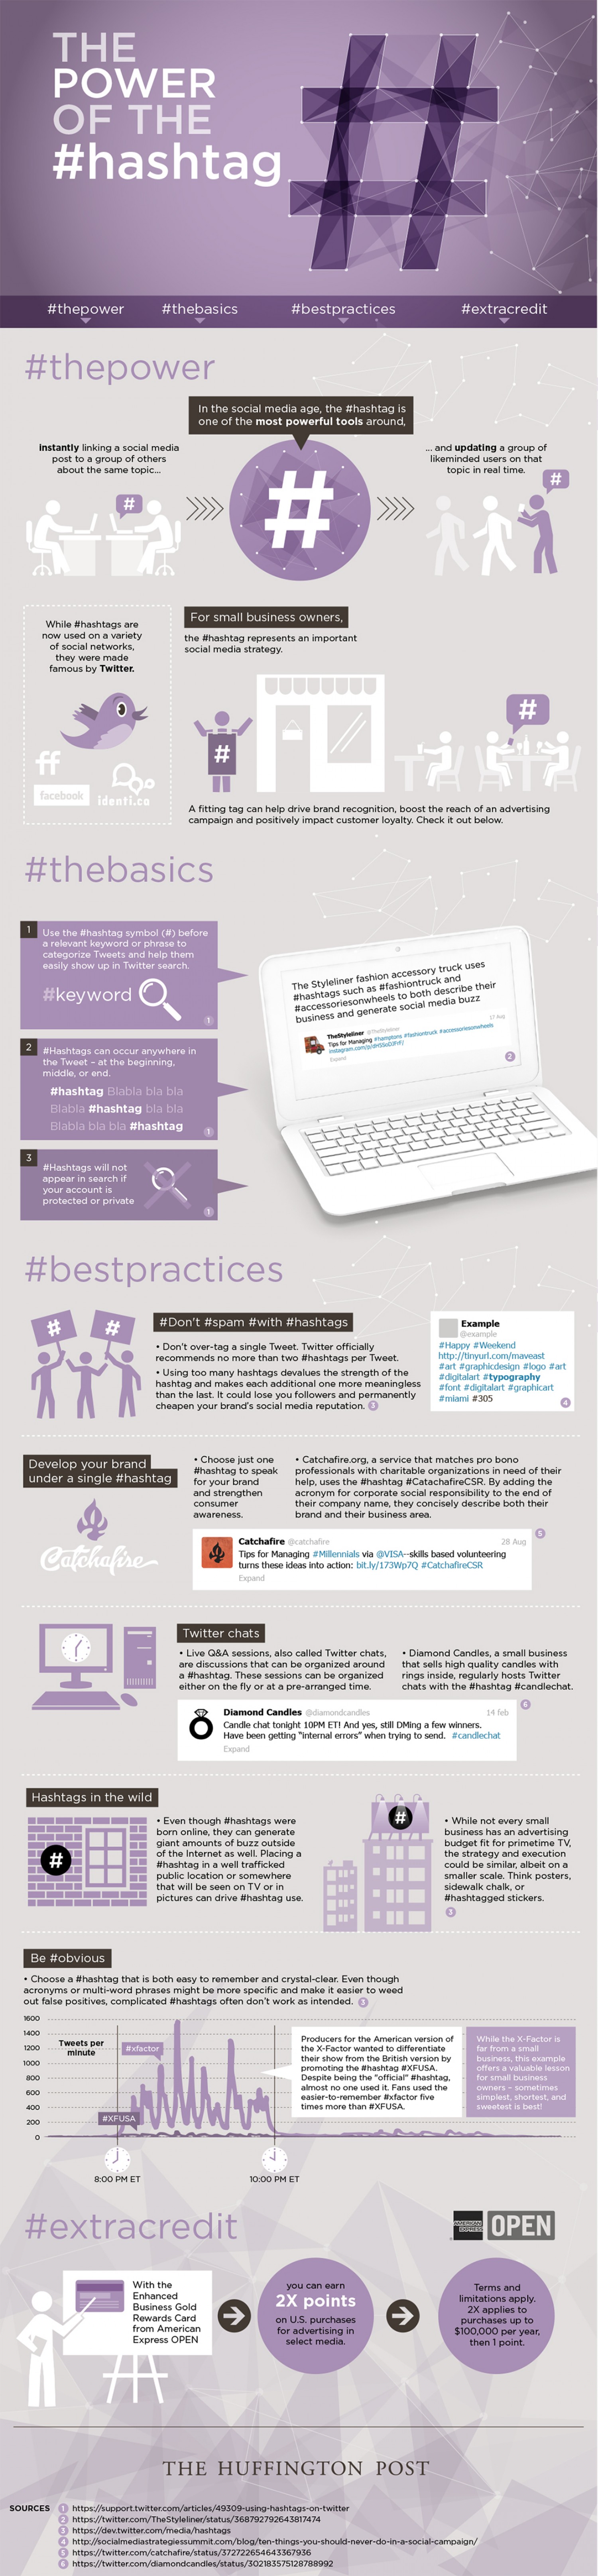 Power Of Hashtag Practices Infographic